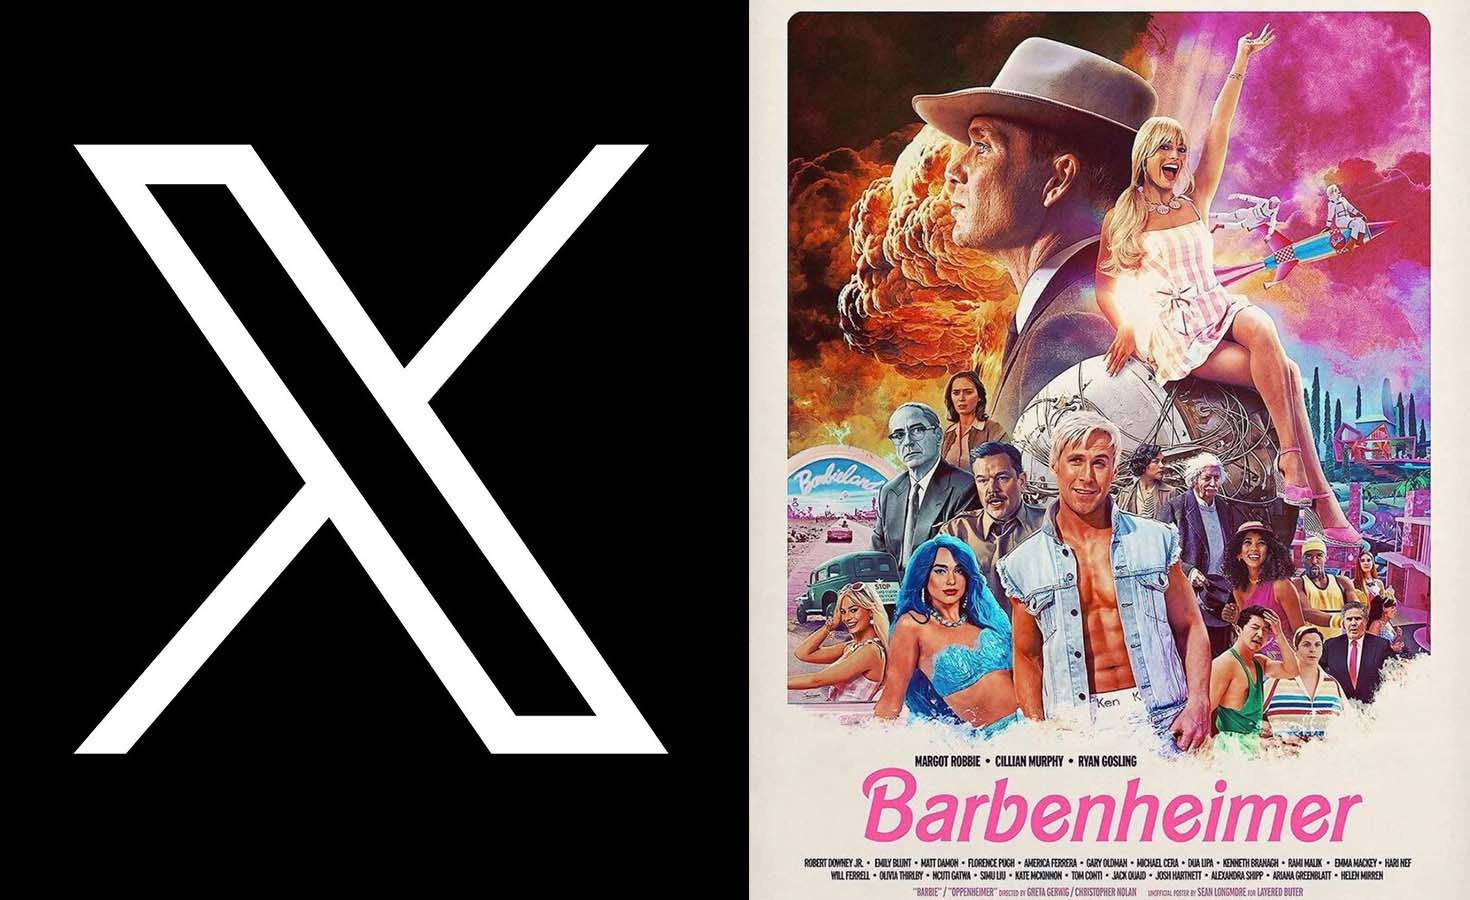 X (Twitter) logo and poster of "Barbenheimer"